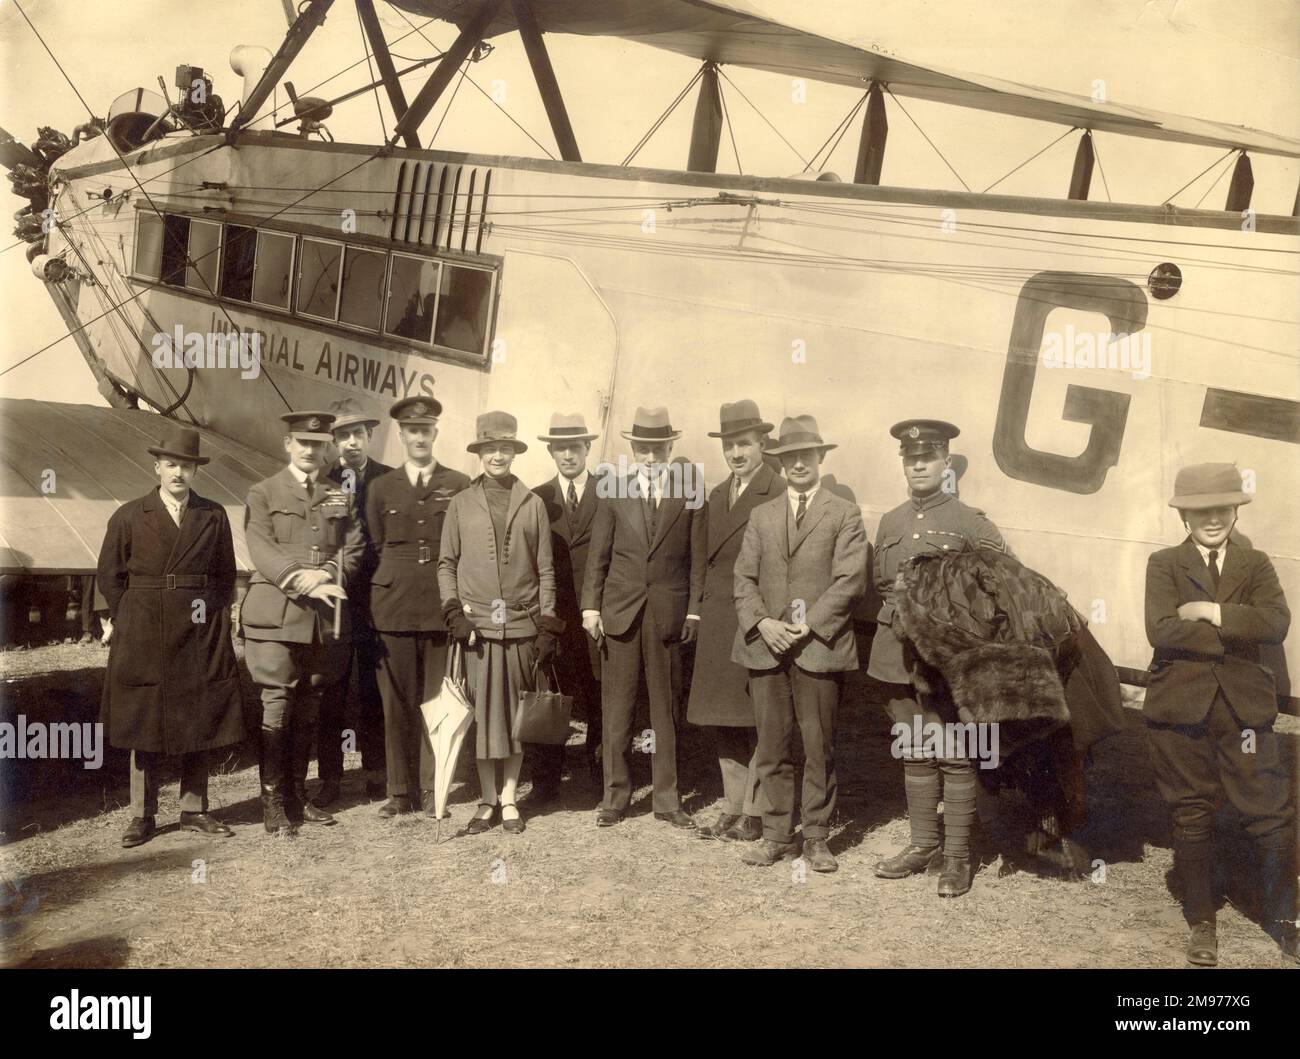 de Havilland DH66, G-EBMX, City of Delhi, of Imperial Airways at Delhi in January 1927. From left: AVM Sir Geoffrey Salmond, Wolley Dod, The Lady Maud Hoare, ?, Sir Samuel Hoare, George Woods Humphrey and F. Mayer. See The Aeroplane, 9 February 1927. Stock Photo